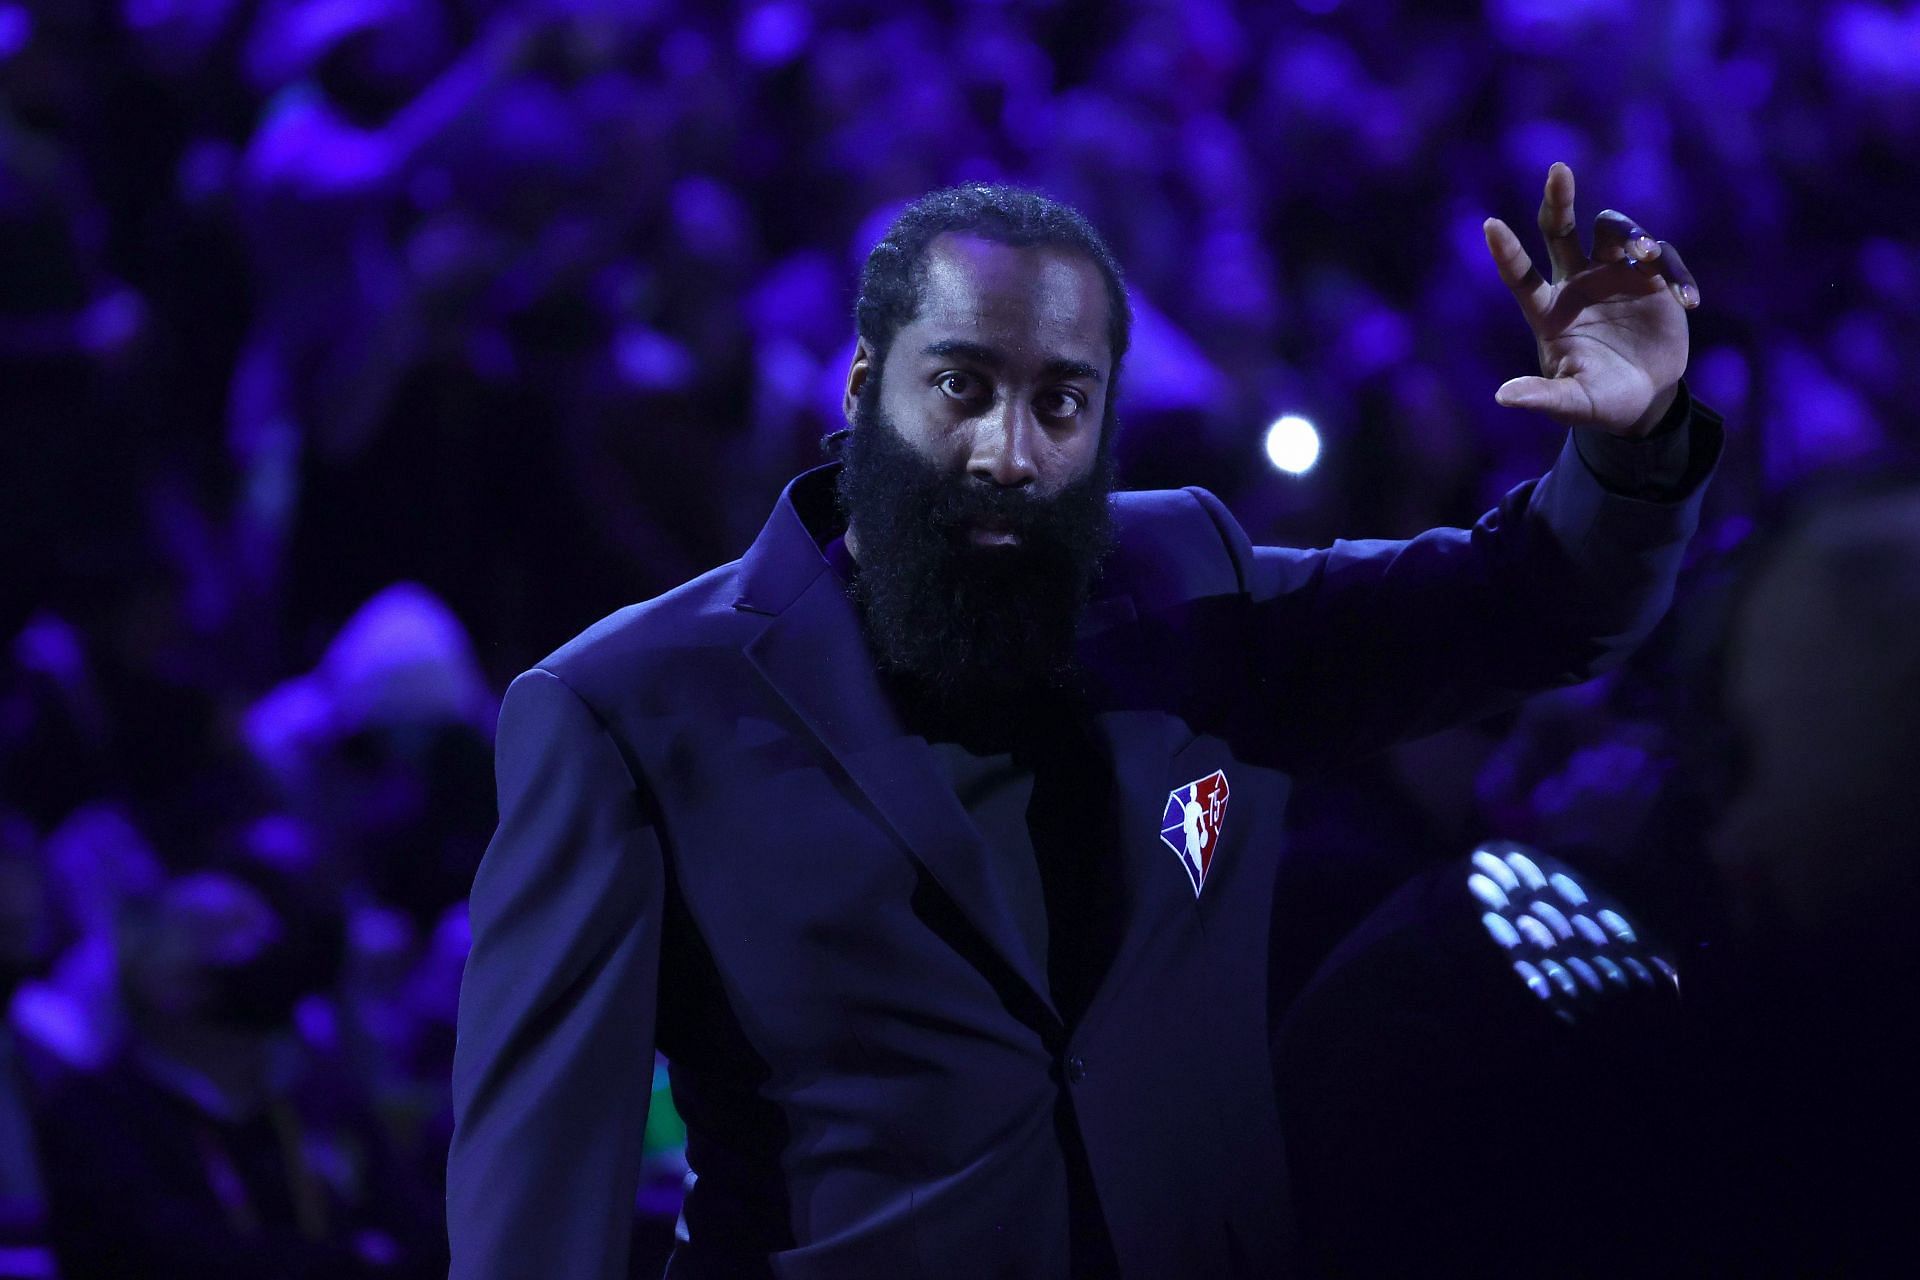 James Harden at the 2022 NBA All-Star Game